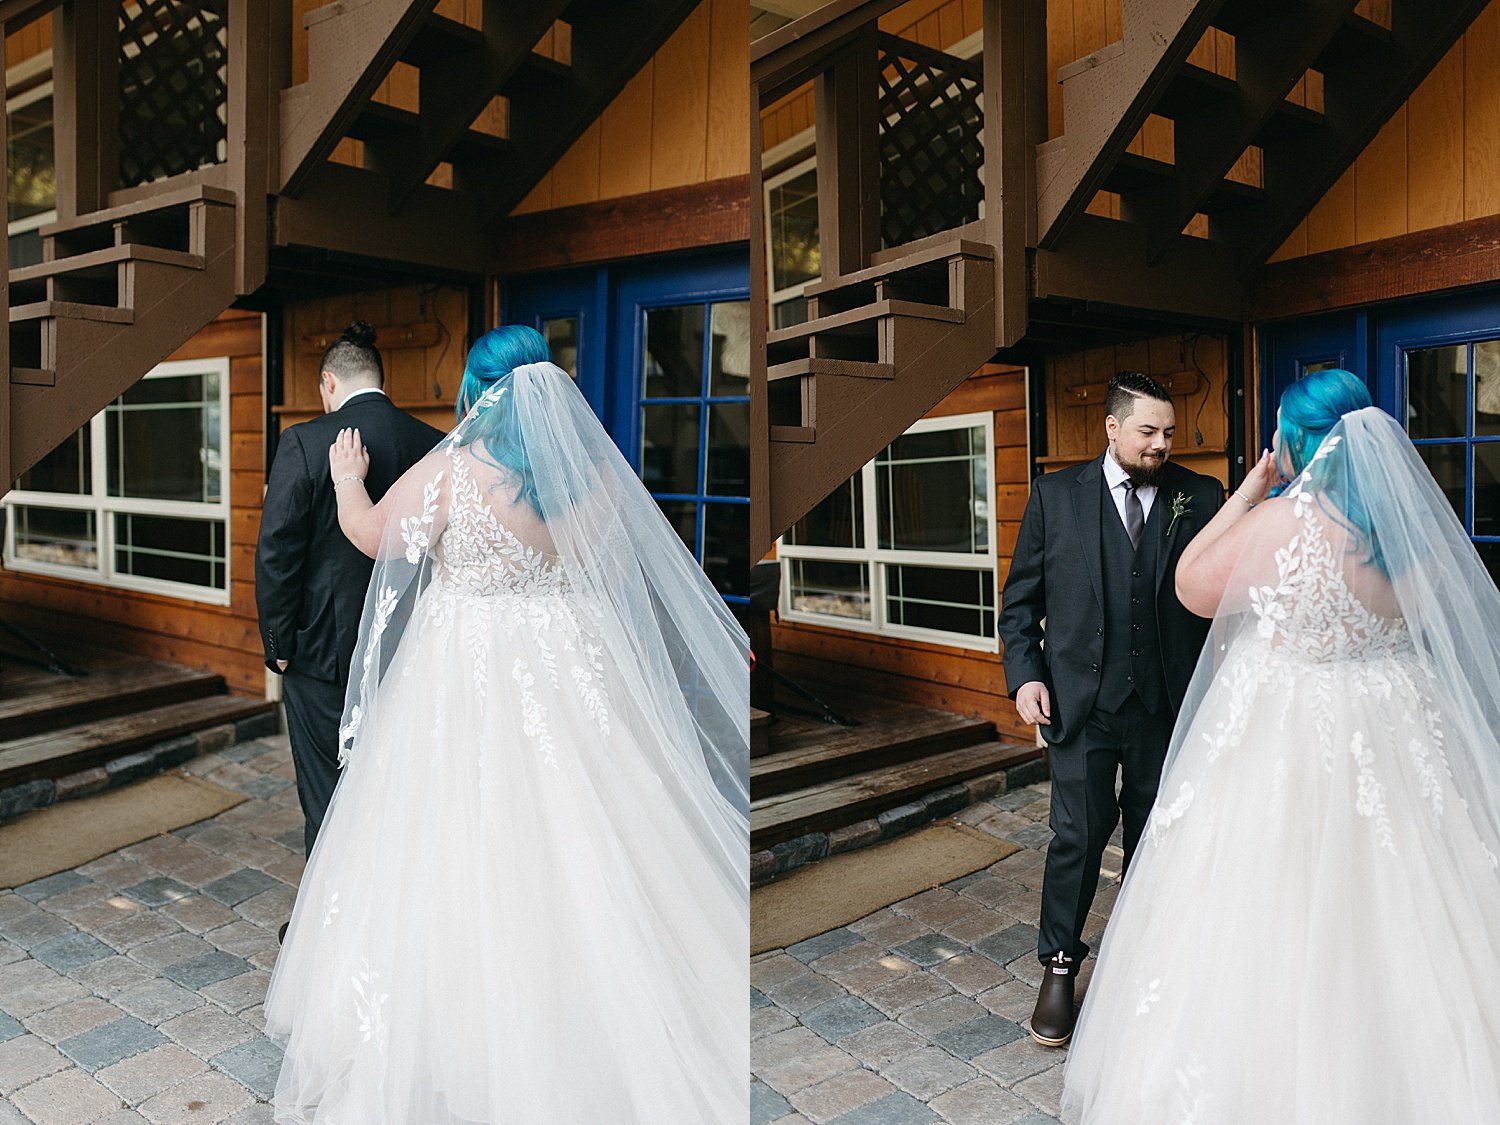  First look with bride and groom at an Airbnb by Rachel Struve Photography alaska elopement photographer in Girdwood ak 